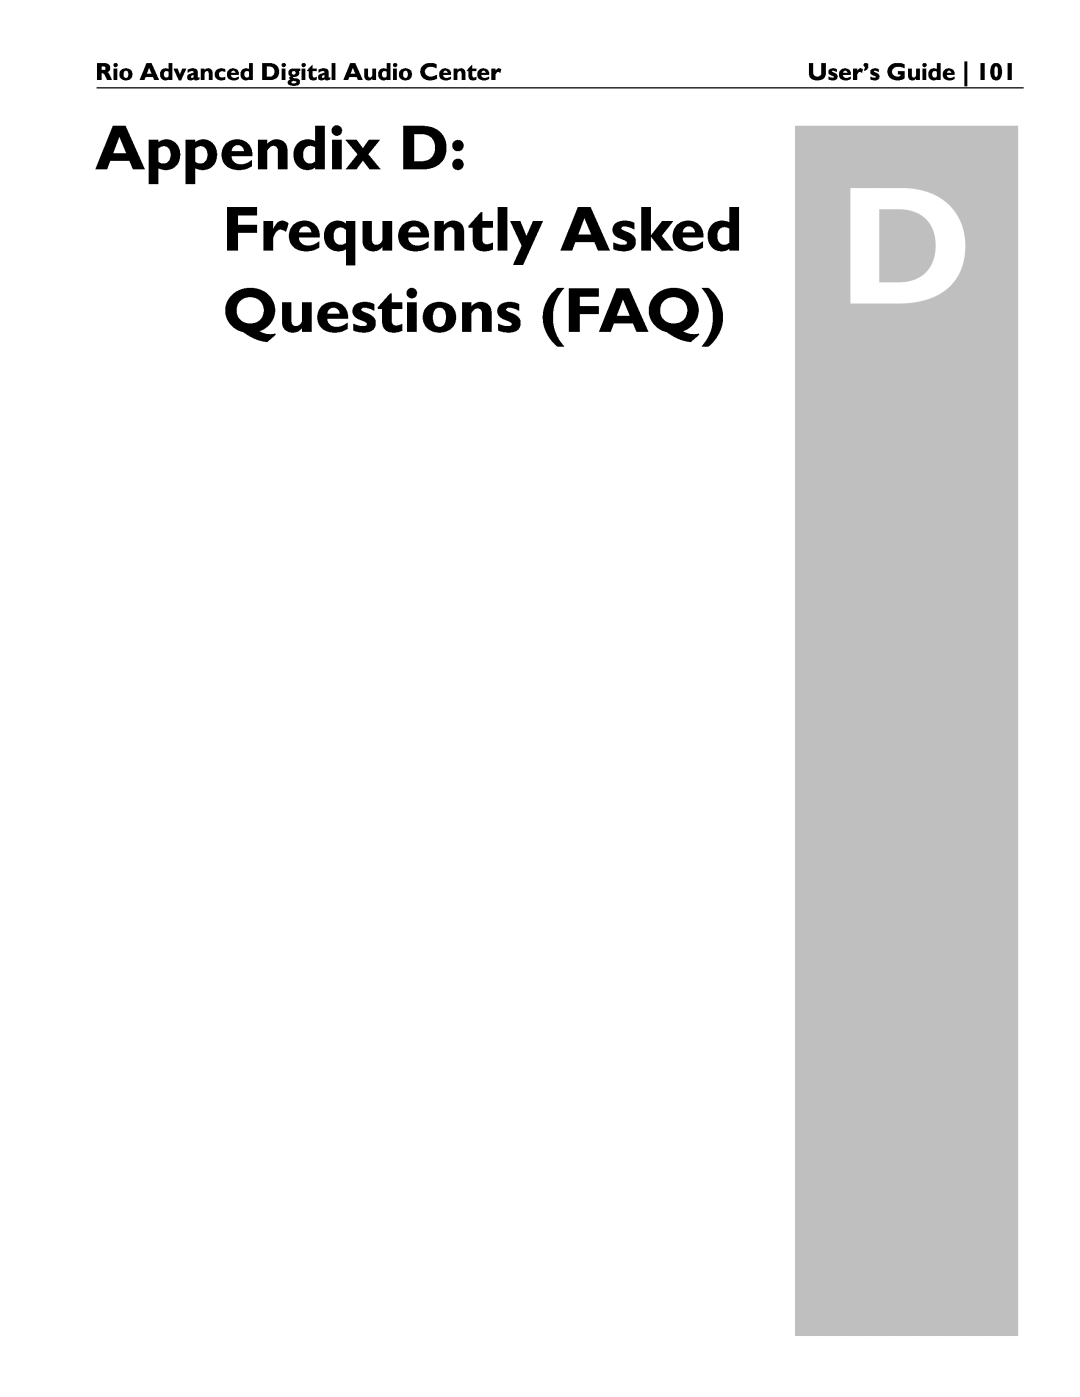 Rio Audio manual Appendix D, Frequently Asked, Questions FAQ, Rio Advanced Digital Audio Center, User’s Guide 